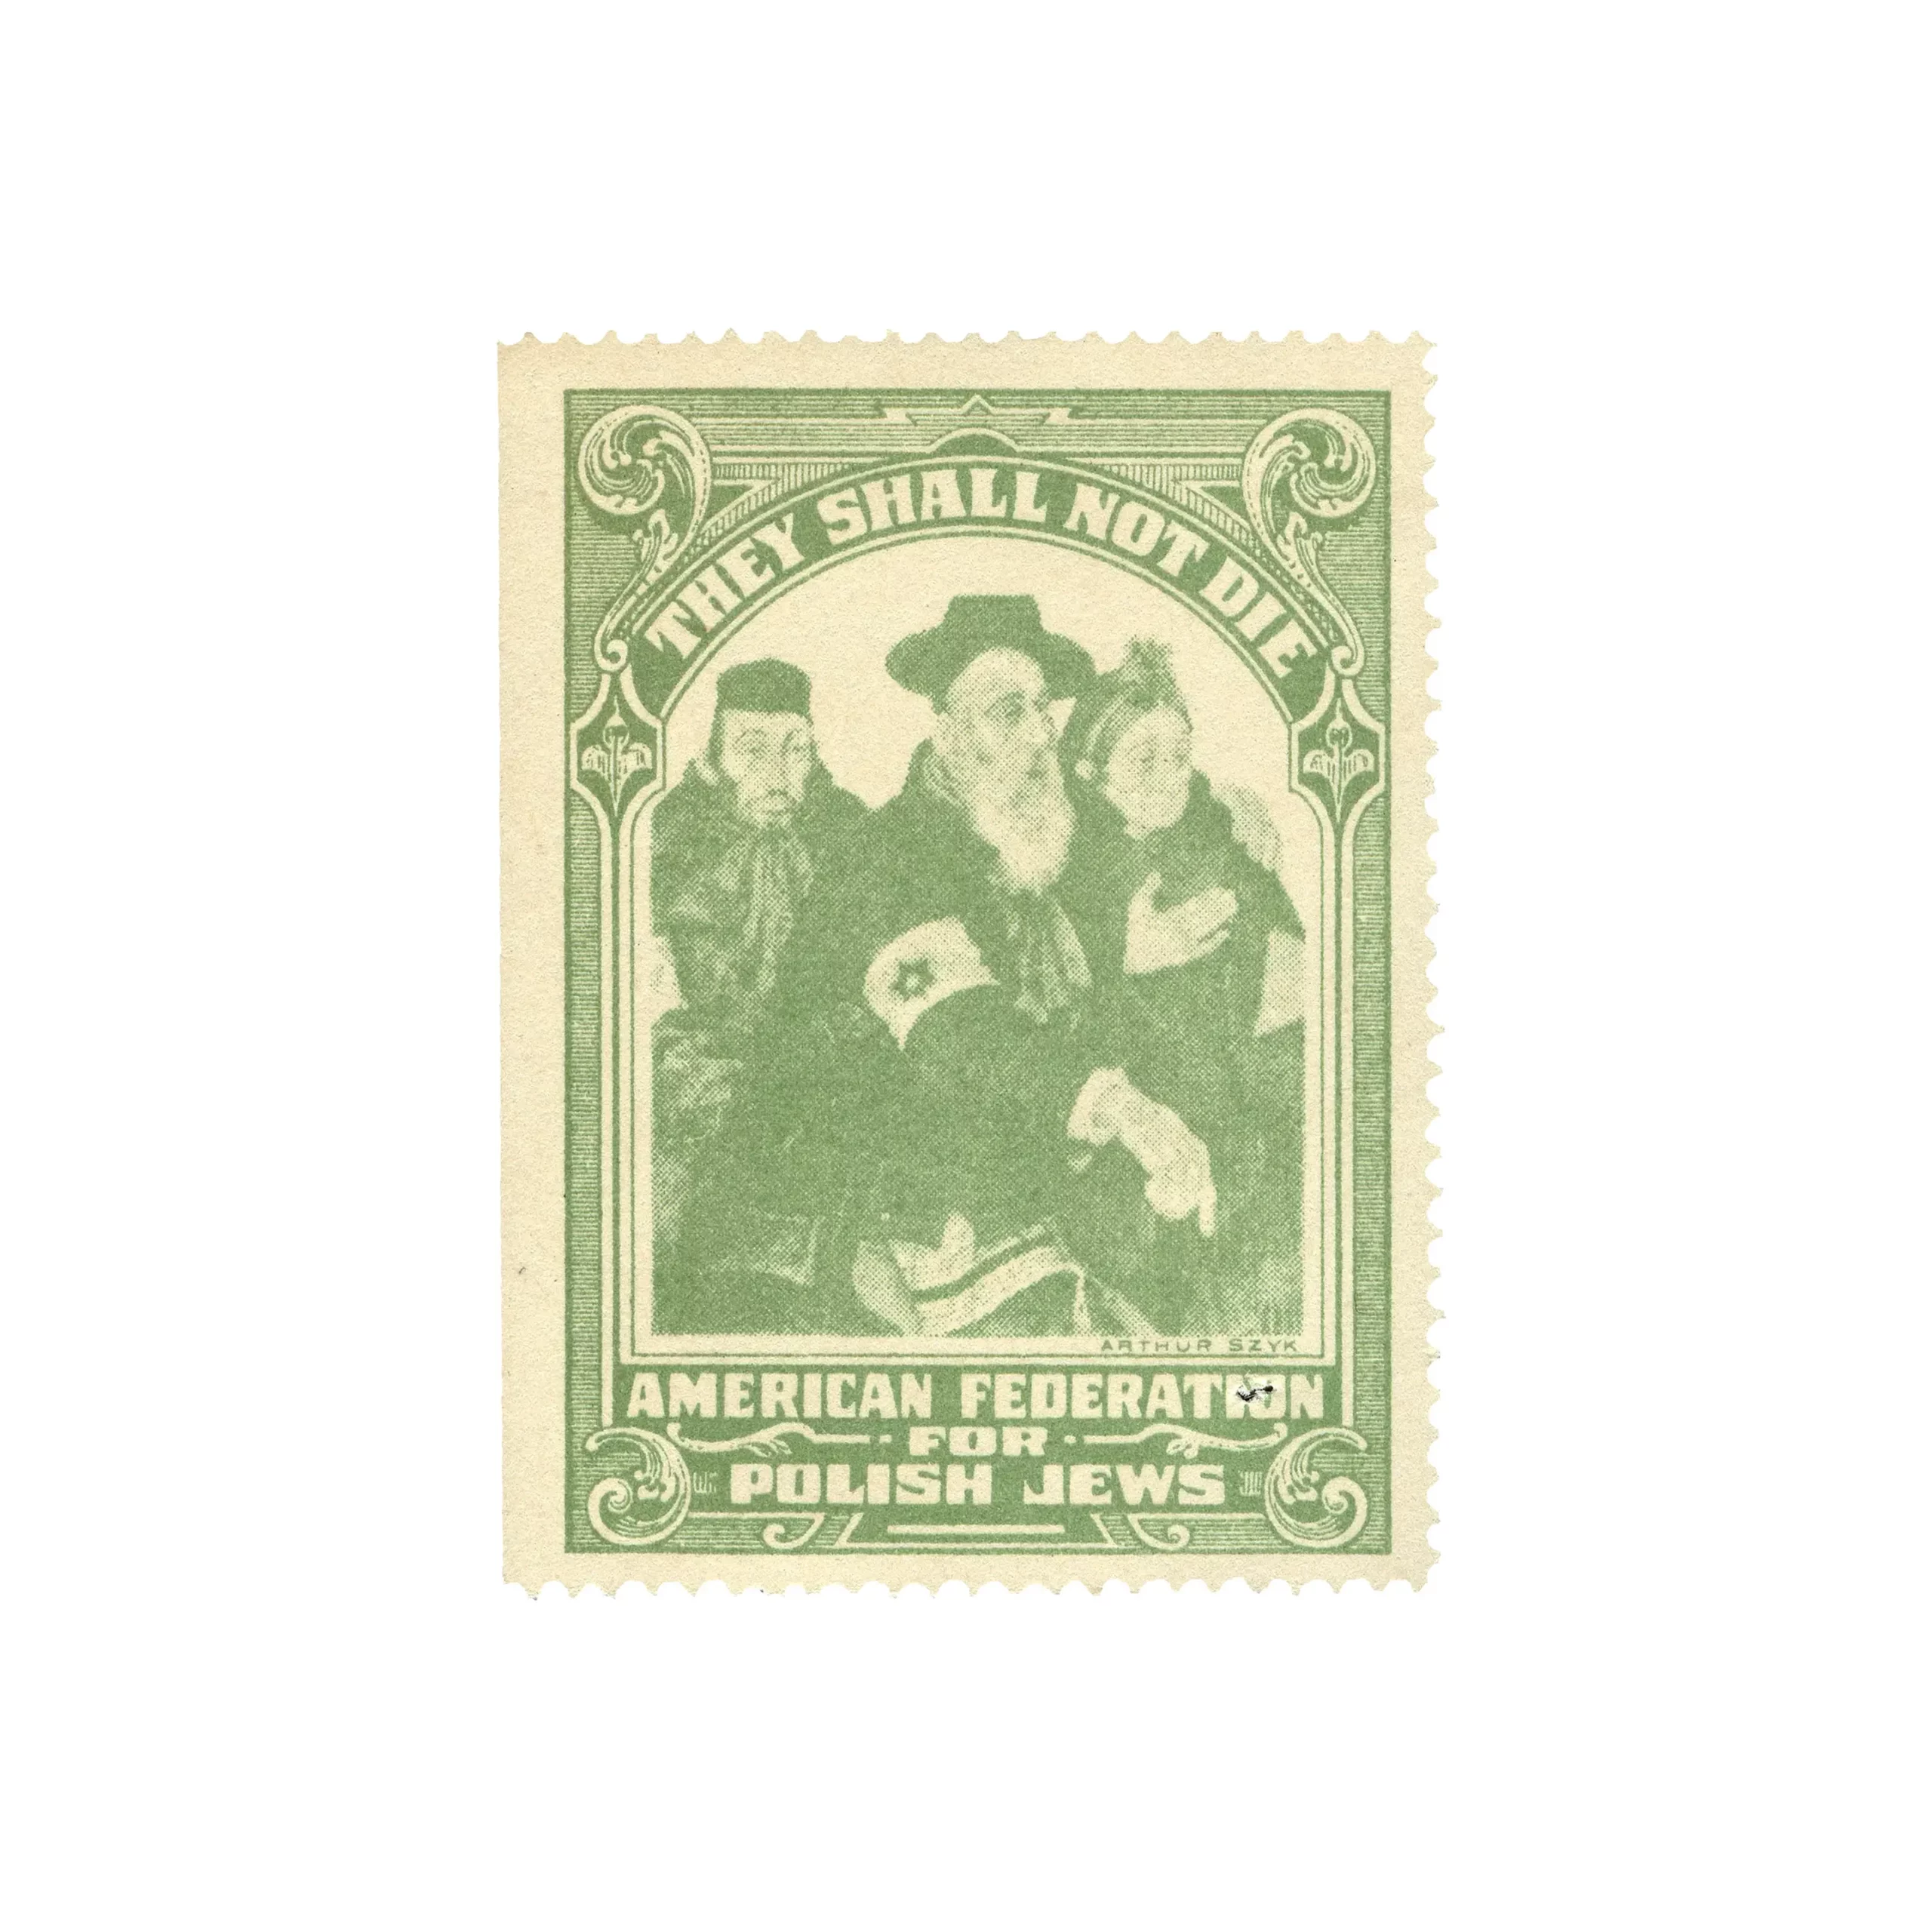 They Shall Not Die Postal Stamp - All The Decor